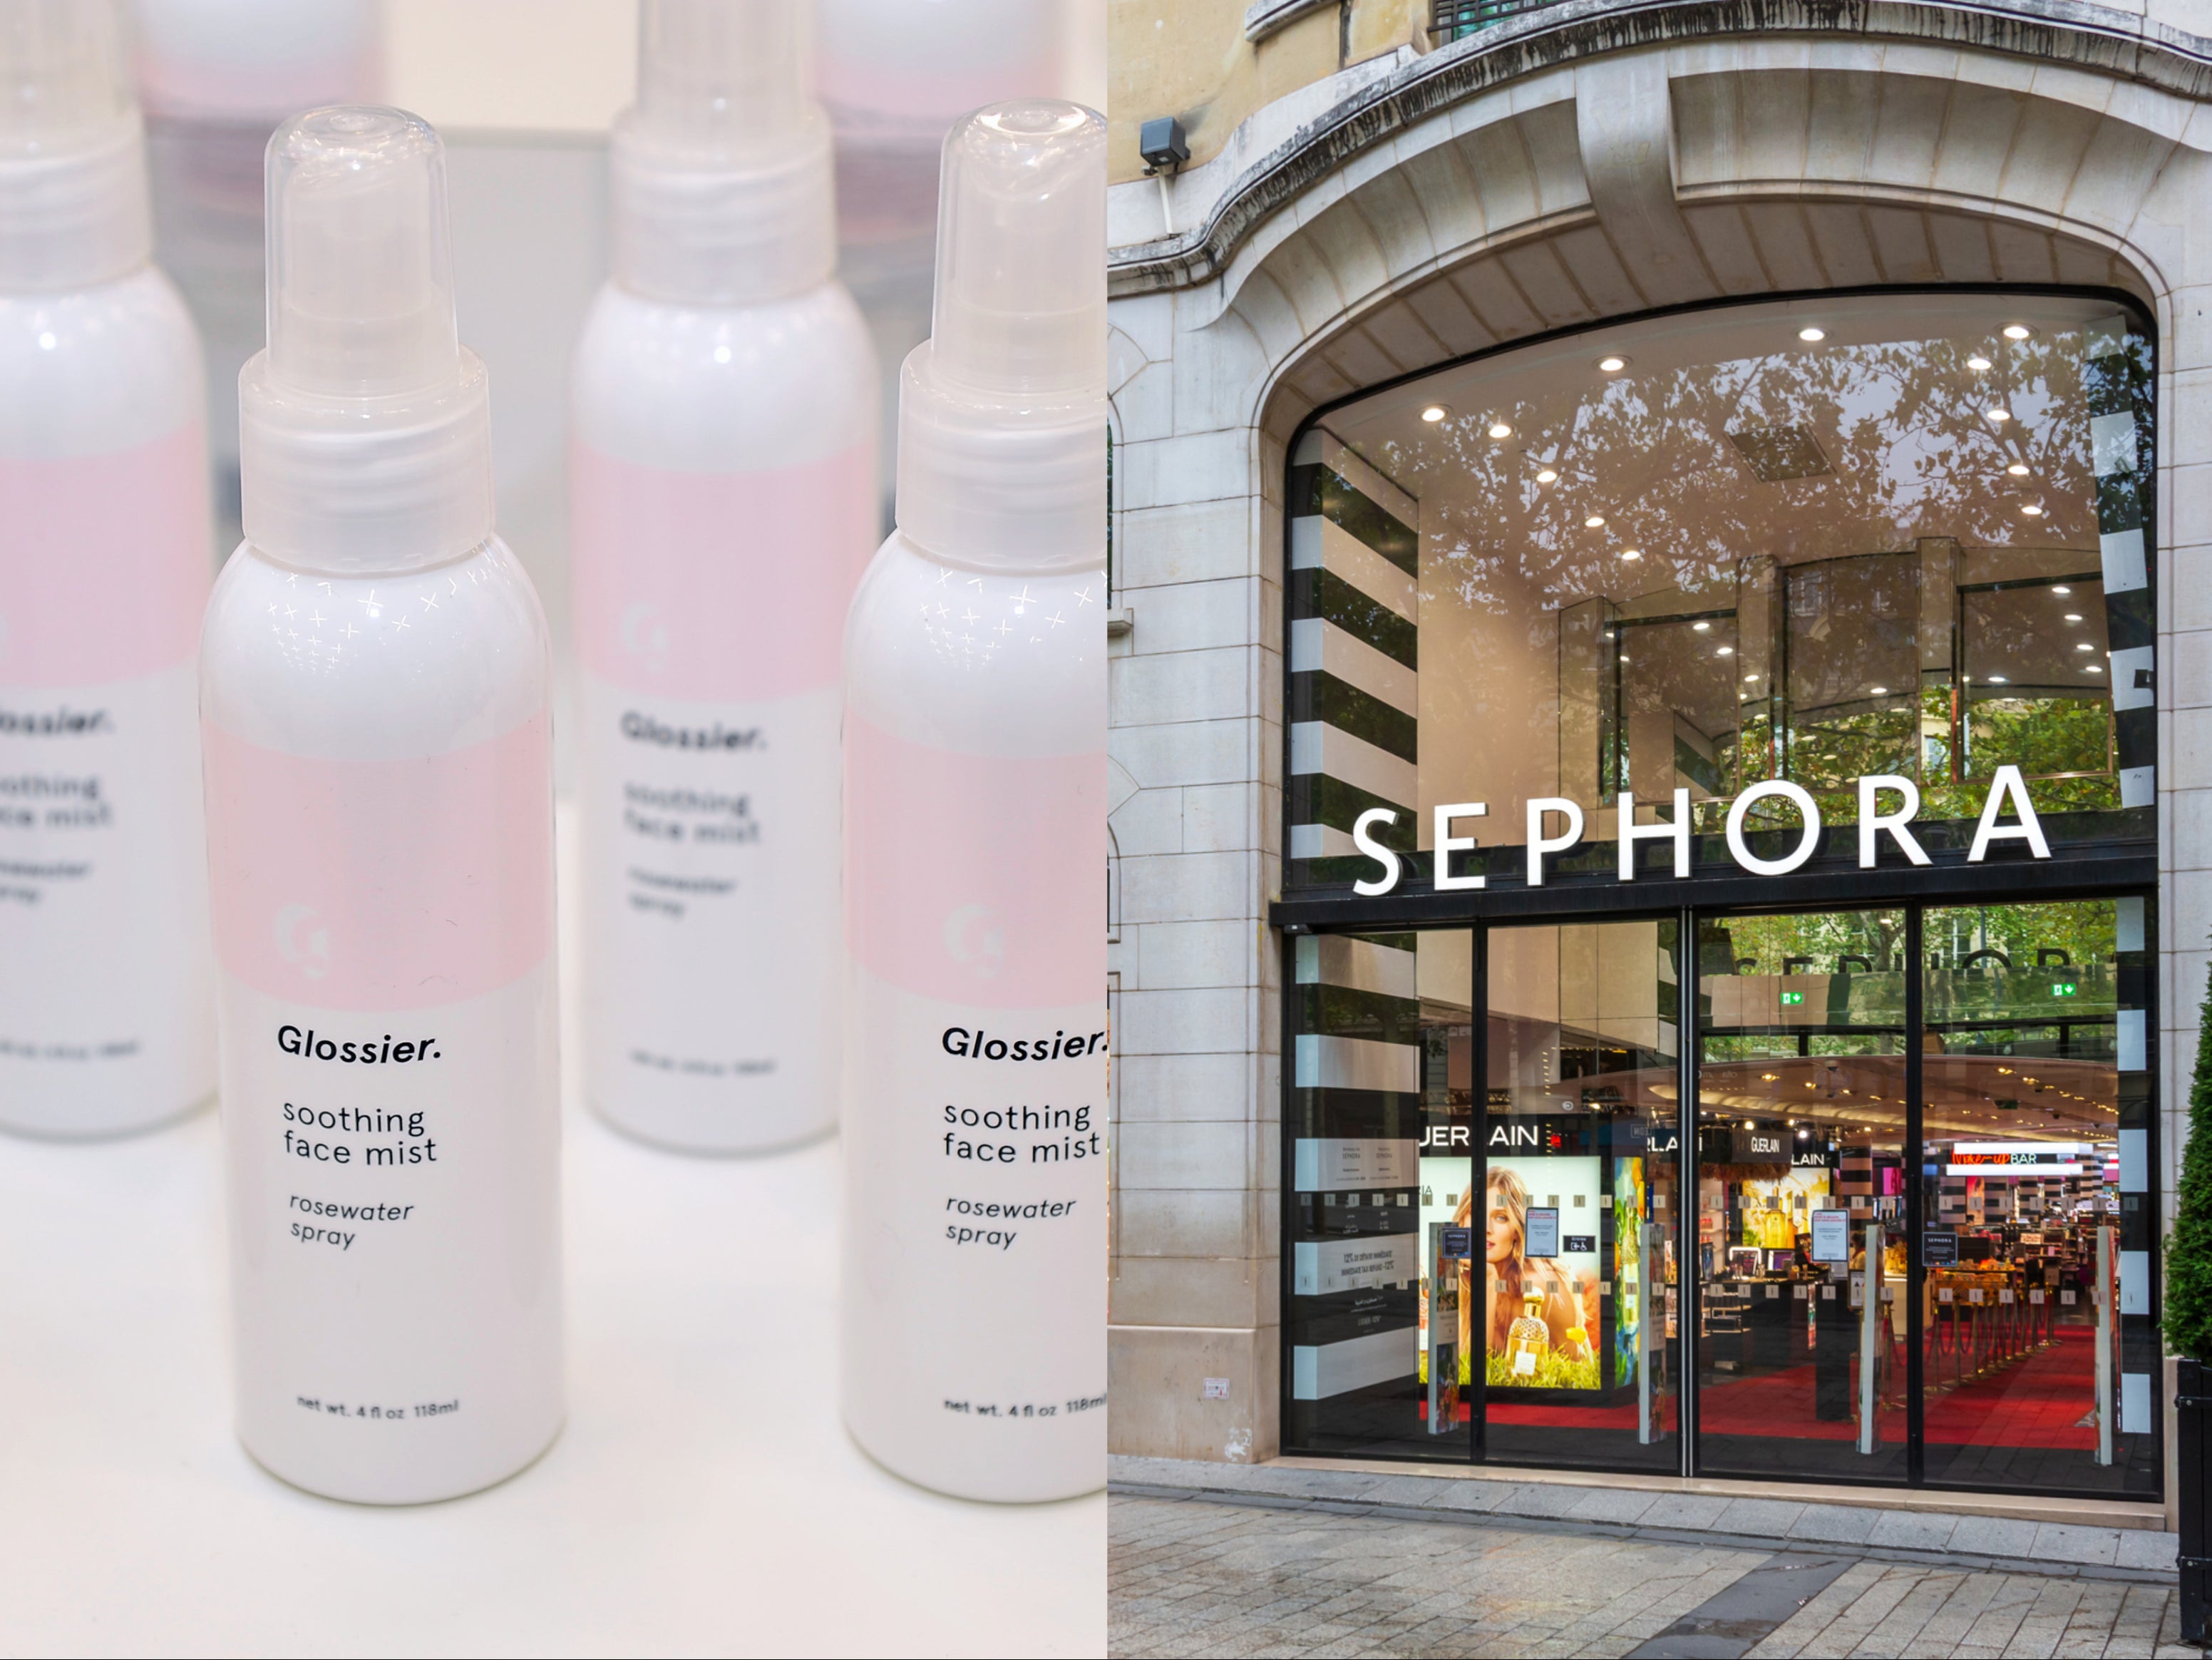 Glossier will be available in Sephora stores in the US and Canada